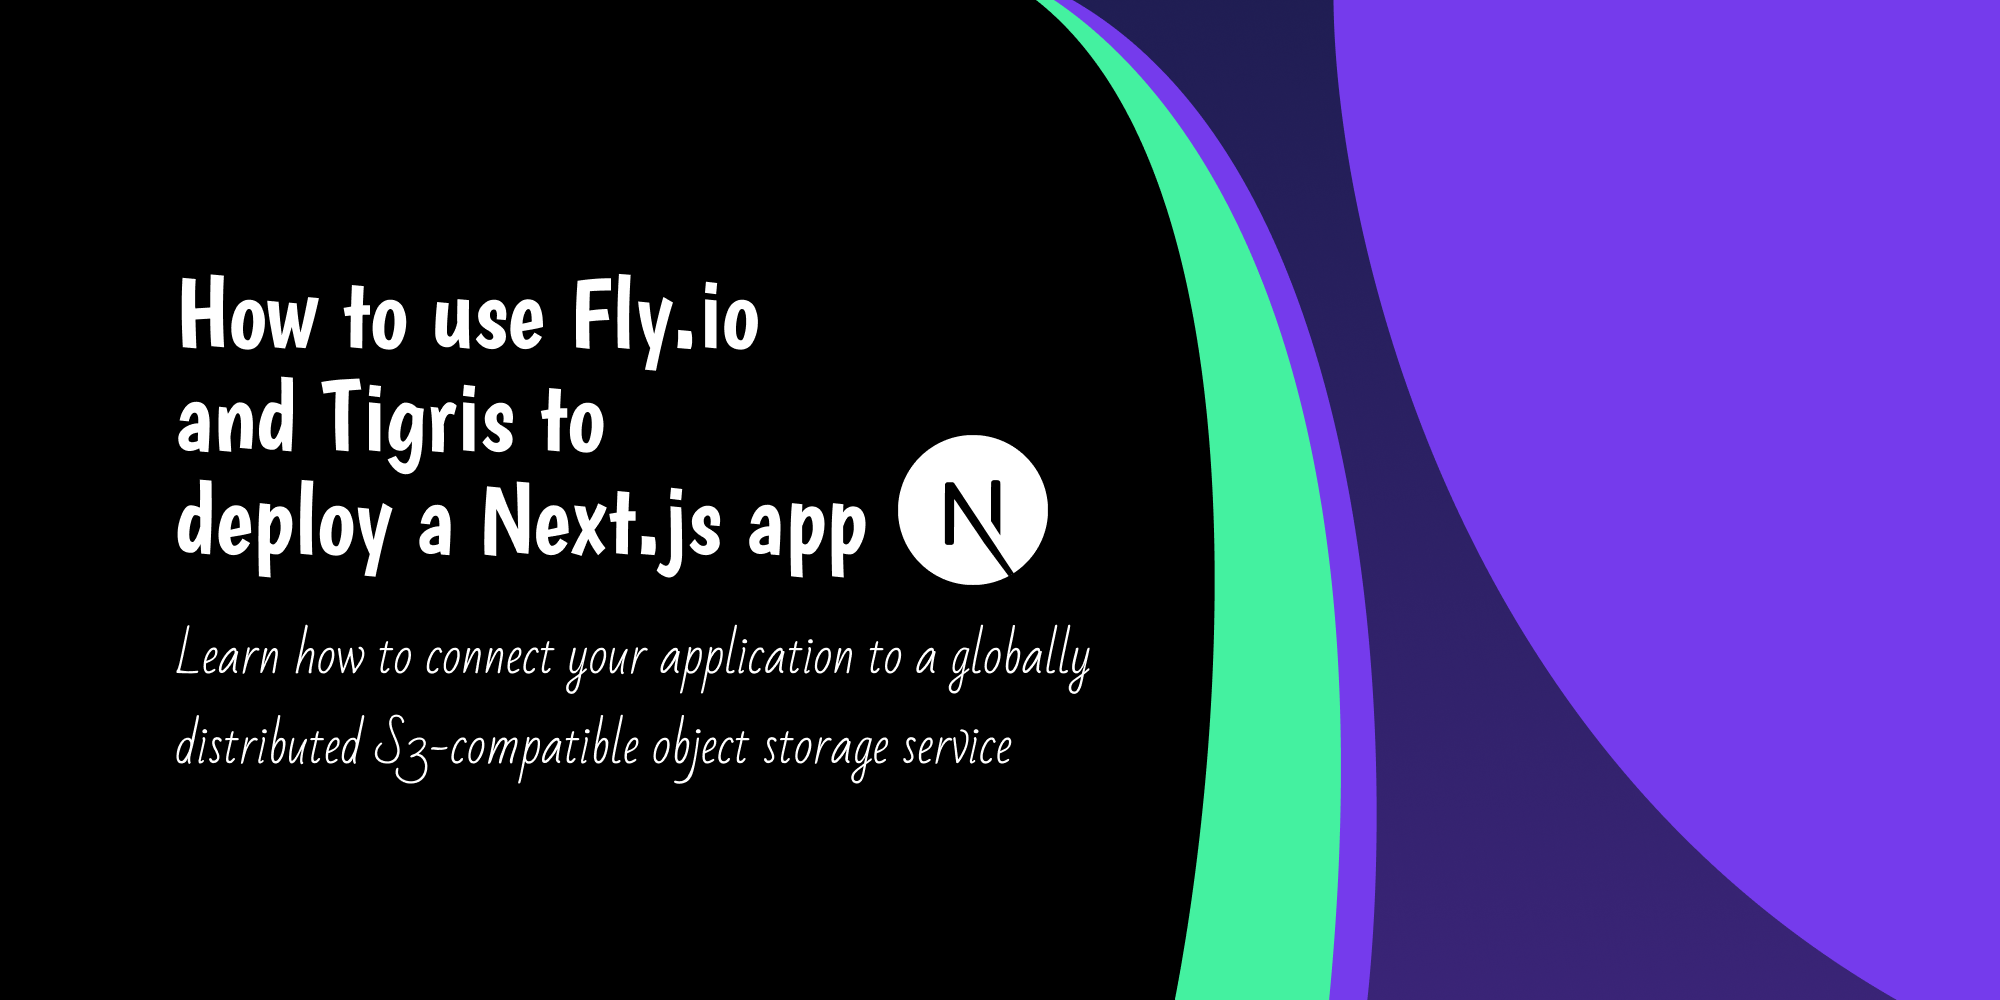 How to Deploy a Next.js App Using Fly.io and Tigris